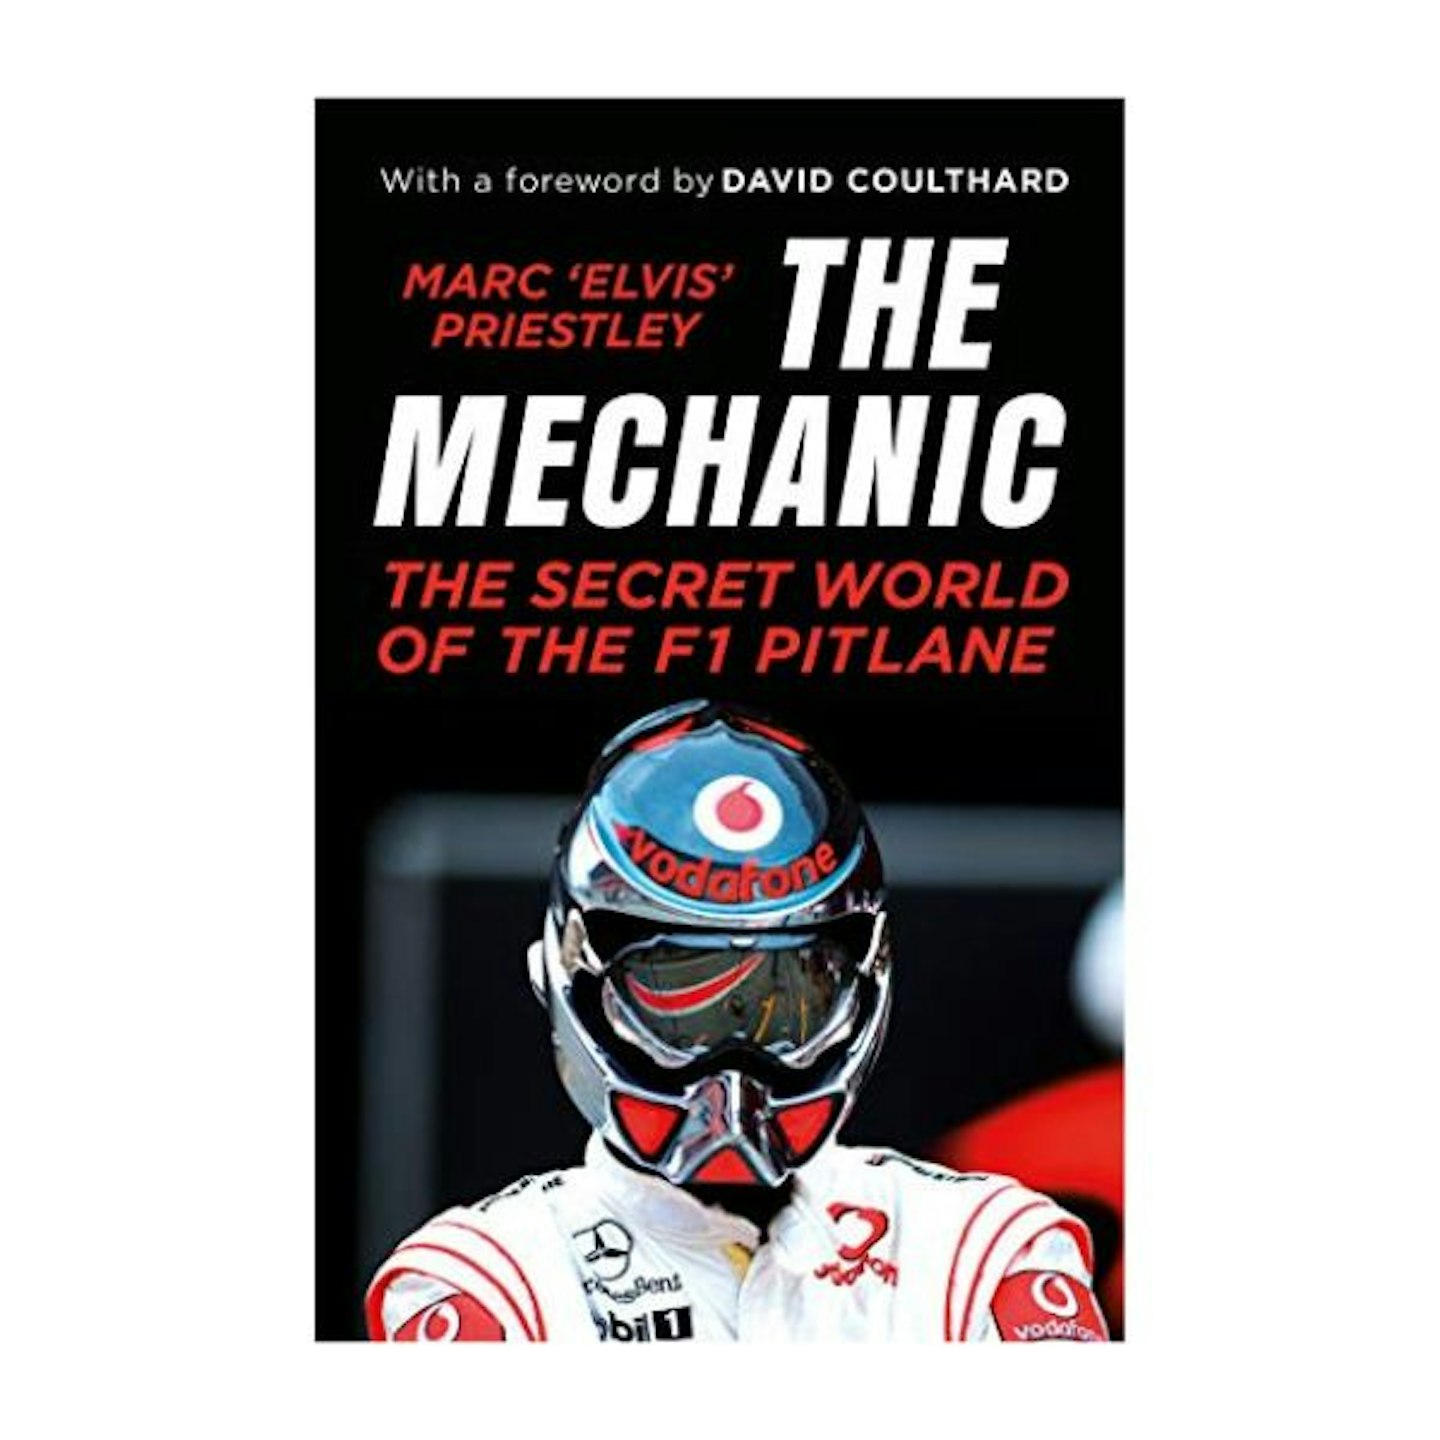 The Mechanic: The Secret World of the F1 Pitlane by Marc Priestly